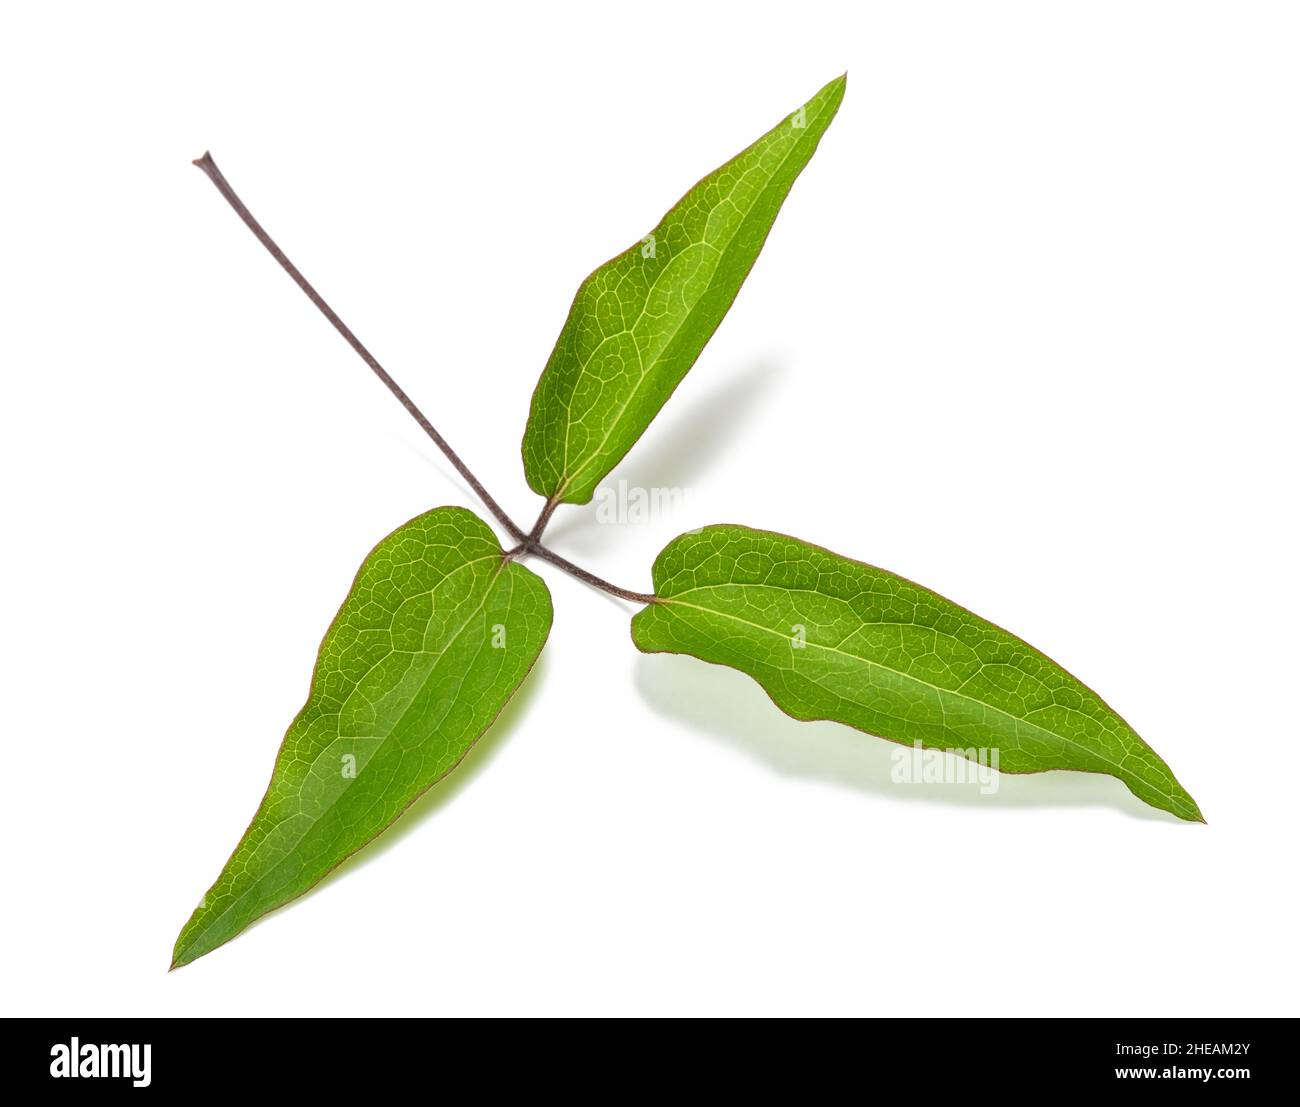 Clematis branch with leaves isolated on white background Stock Photo